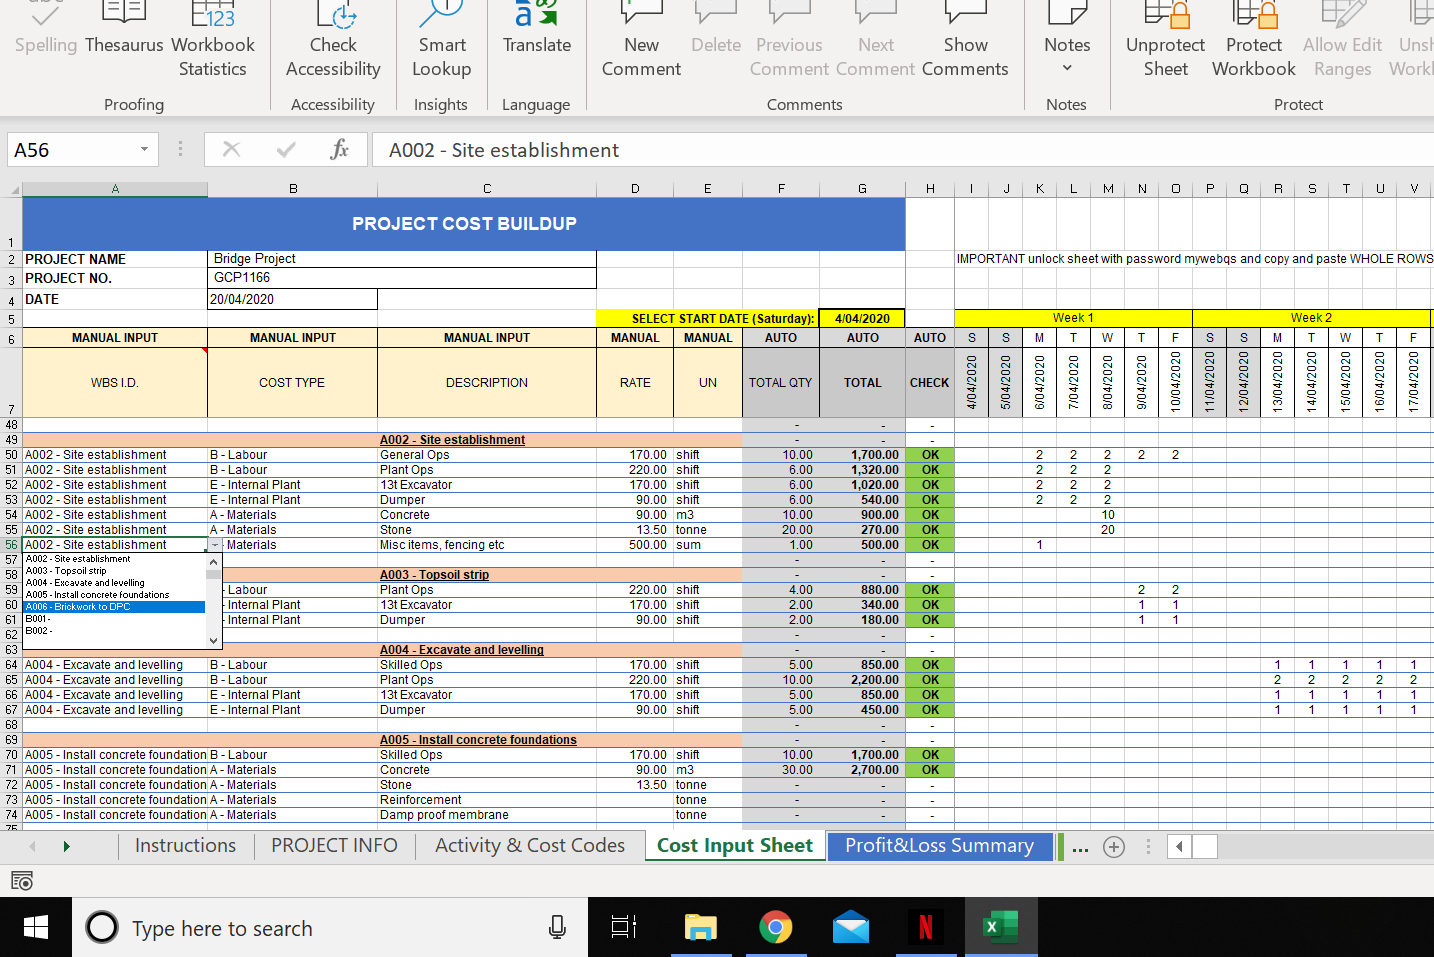 Construction Budget Excel Template / Cost Control Template - webQS With Project Cost Estimate And Budget Template Pertaining To Project Cost Estimate And Budget Template